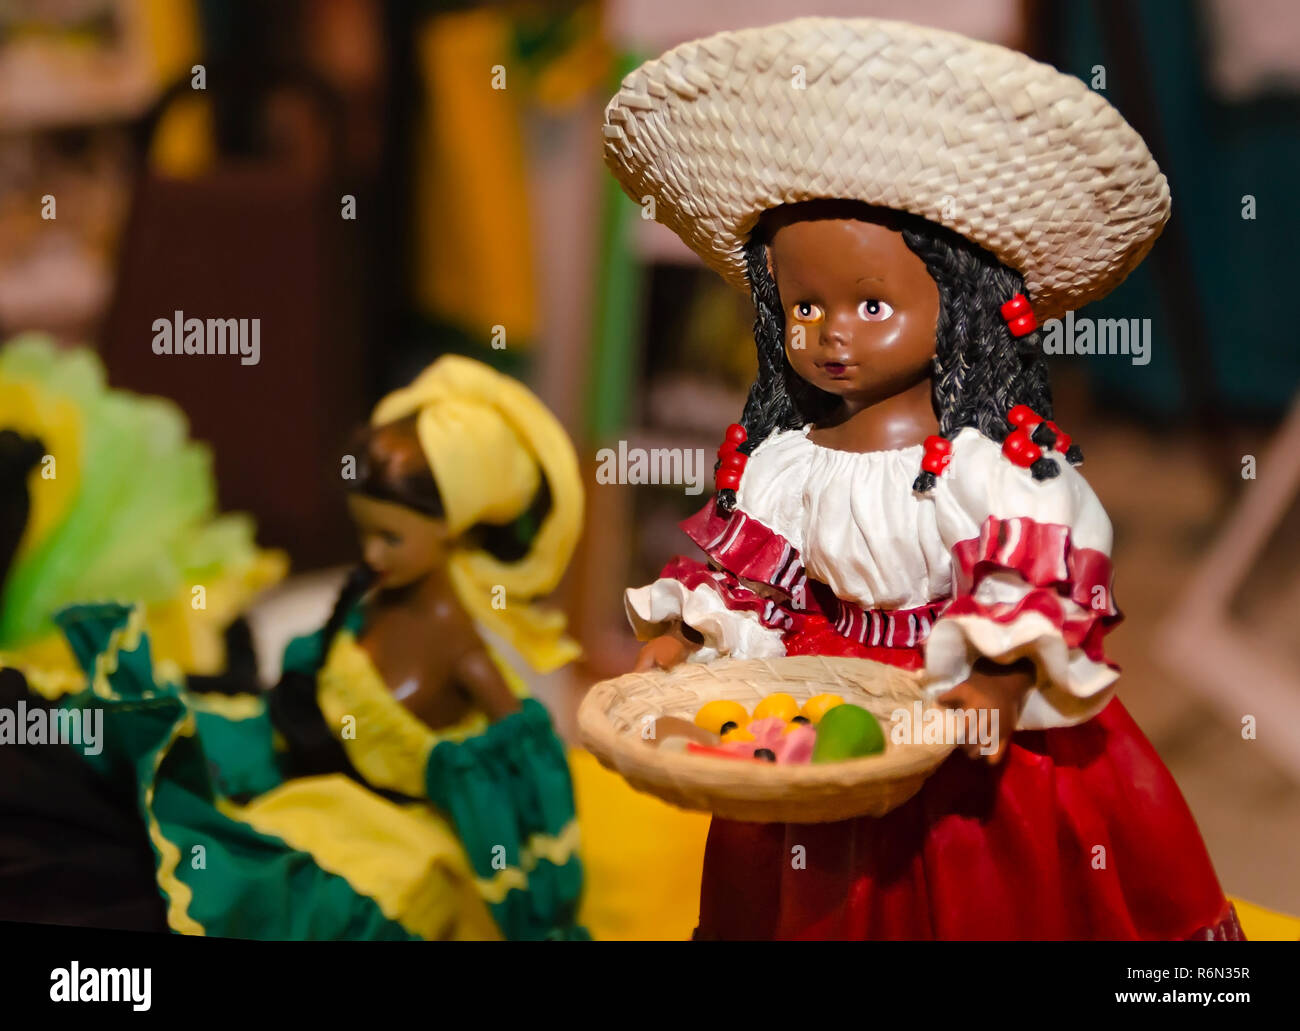 A Jamaican doll souvenir is displayed at the 34th annual Mobile International Festival, Nov. 17, 2018, in Mobile, Alabama. Stock Photo